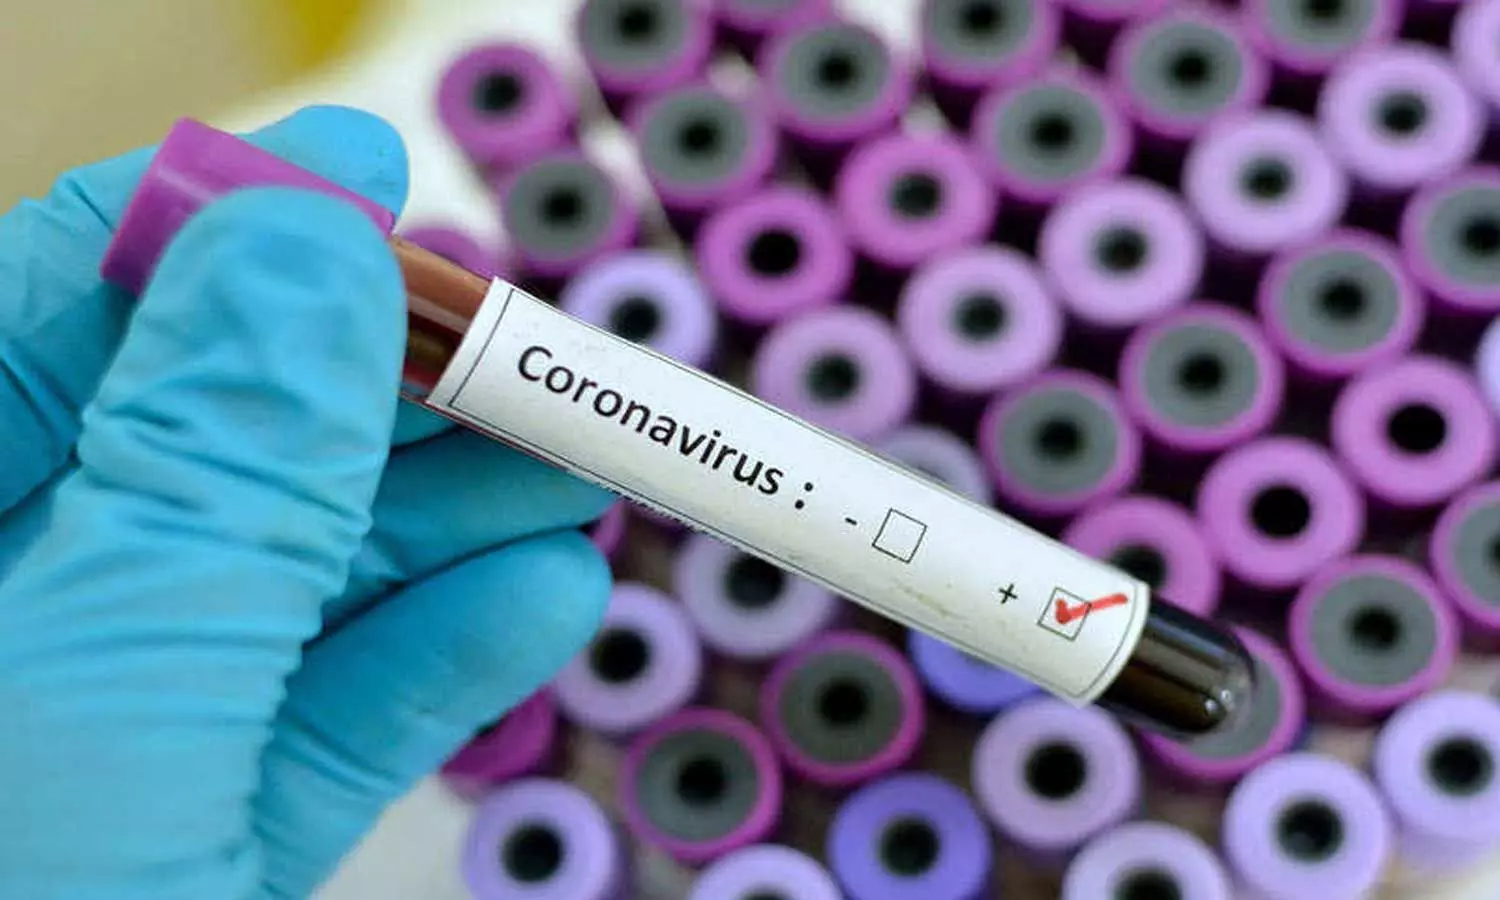 Mumbai: Doctor attached to Byculla Jail tests positive for coronavirus